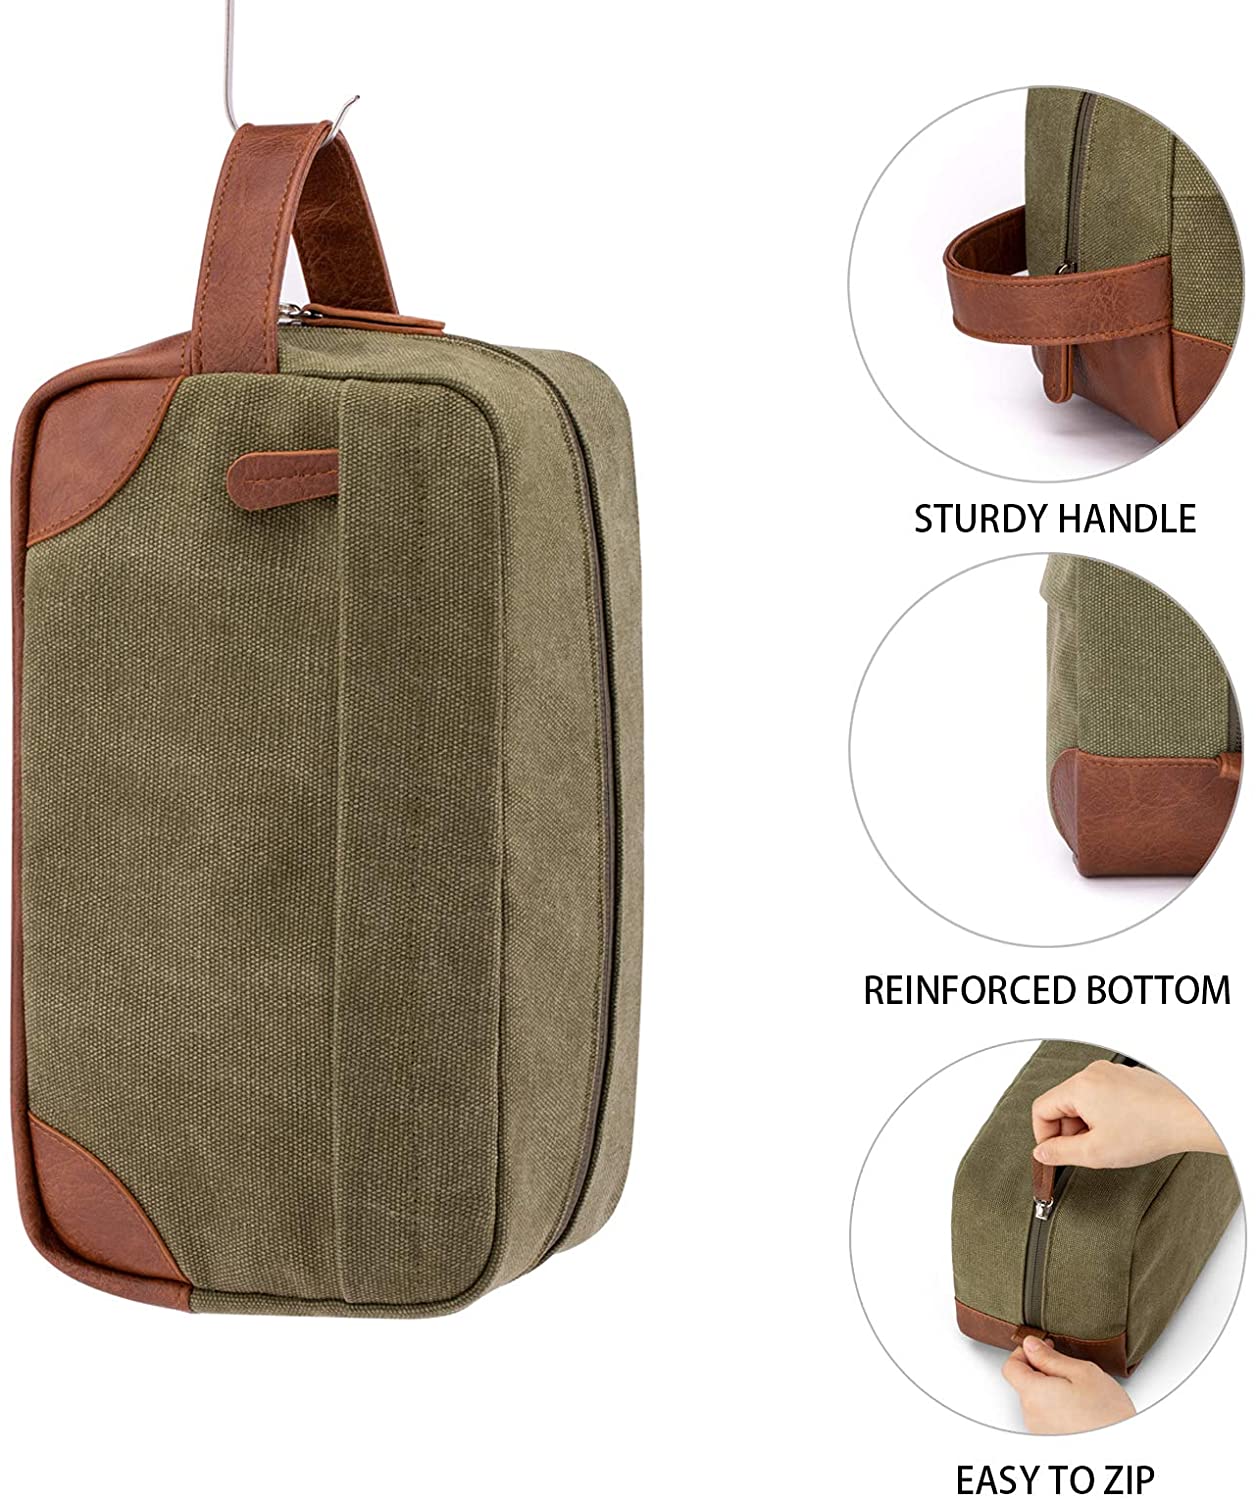 Toiletry Bag Hanging Dopp Kit for Men Water Resistant Canvas Shaving Bag with PU leather Handle Large Capacity for Travel Manufacturer 